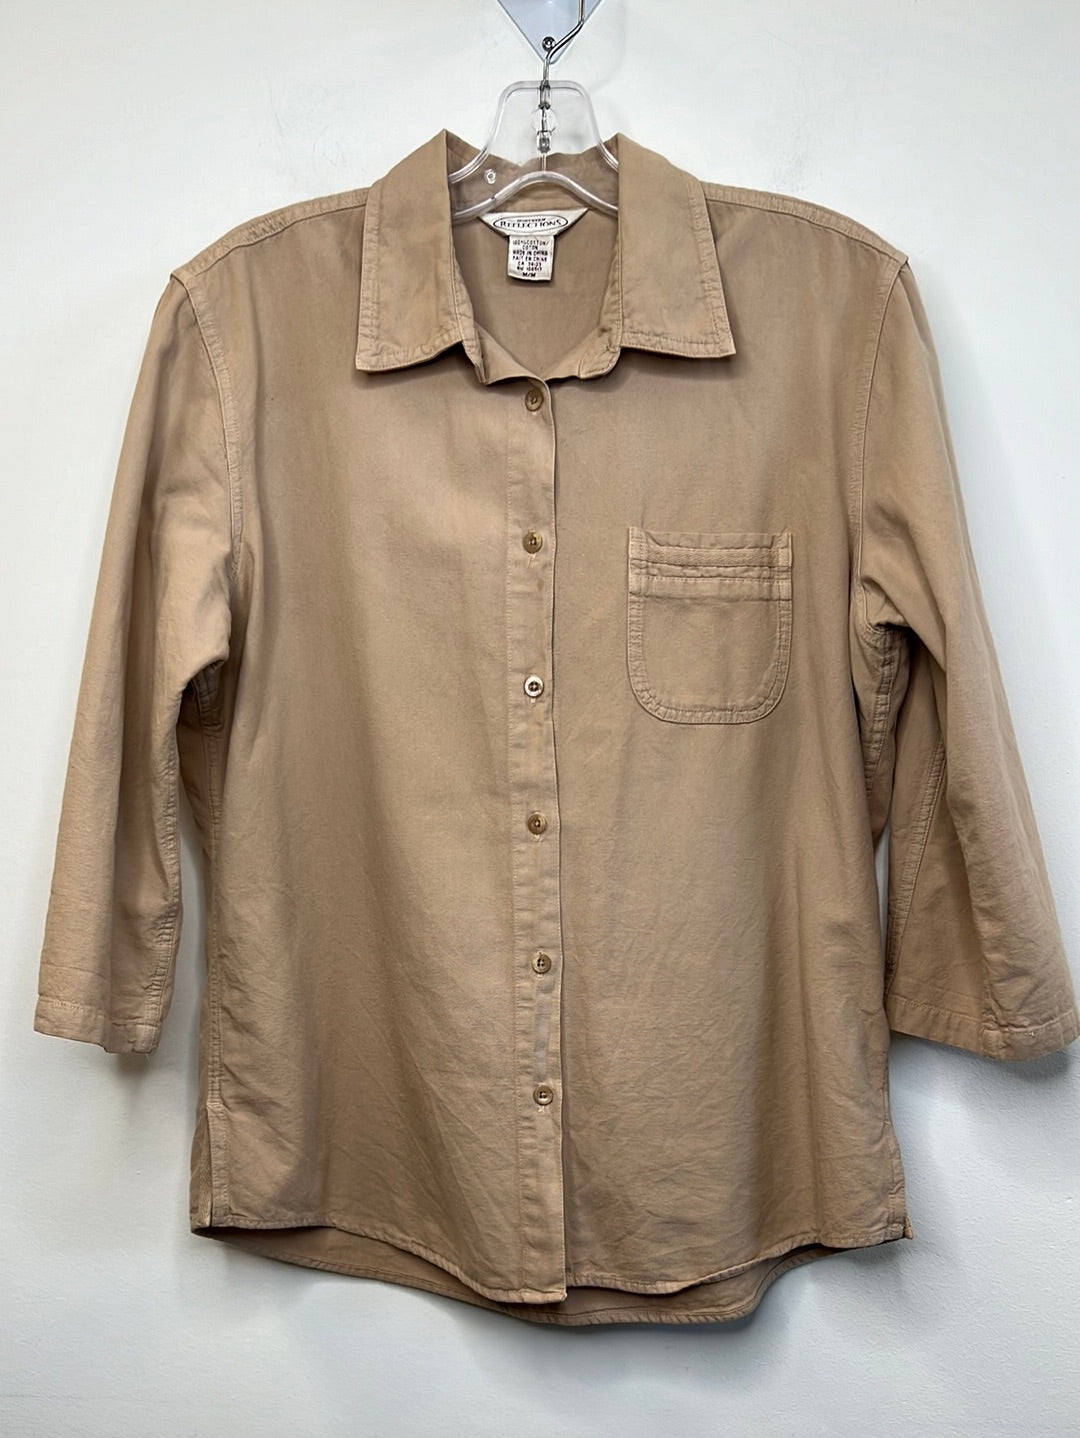 Vintage Northern Reflections Button-Up Shirt (M)